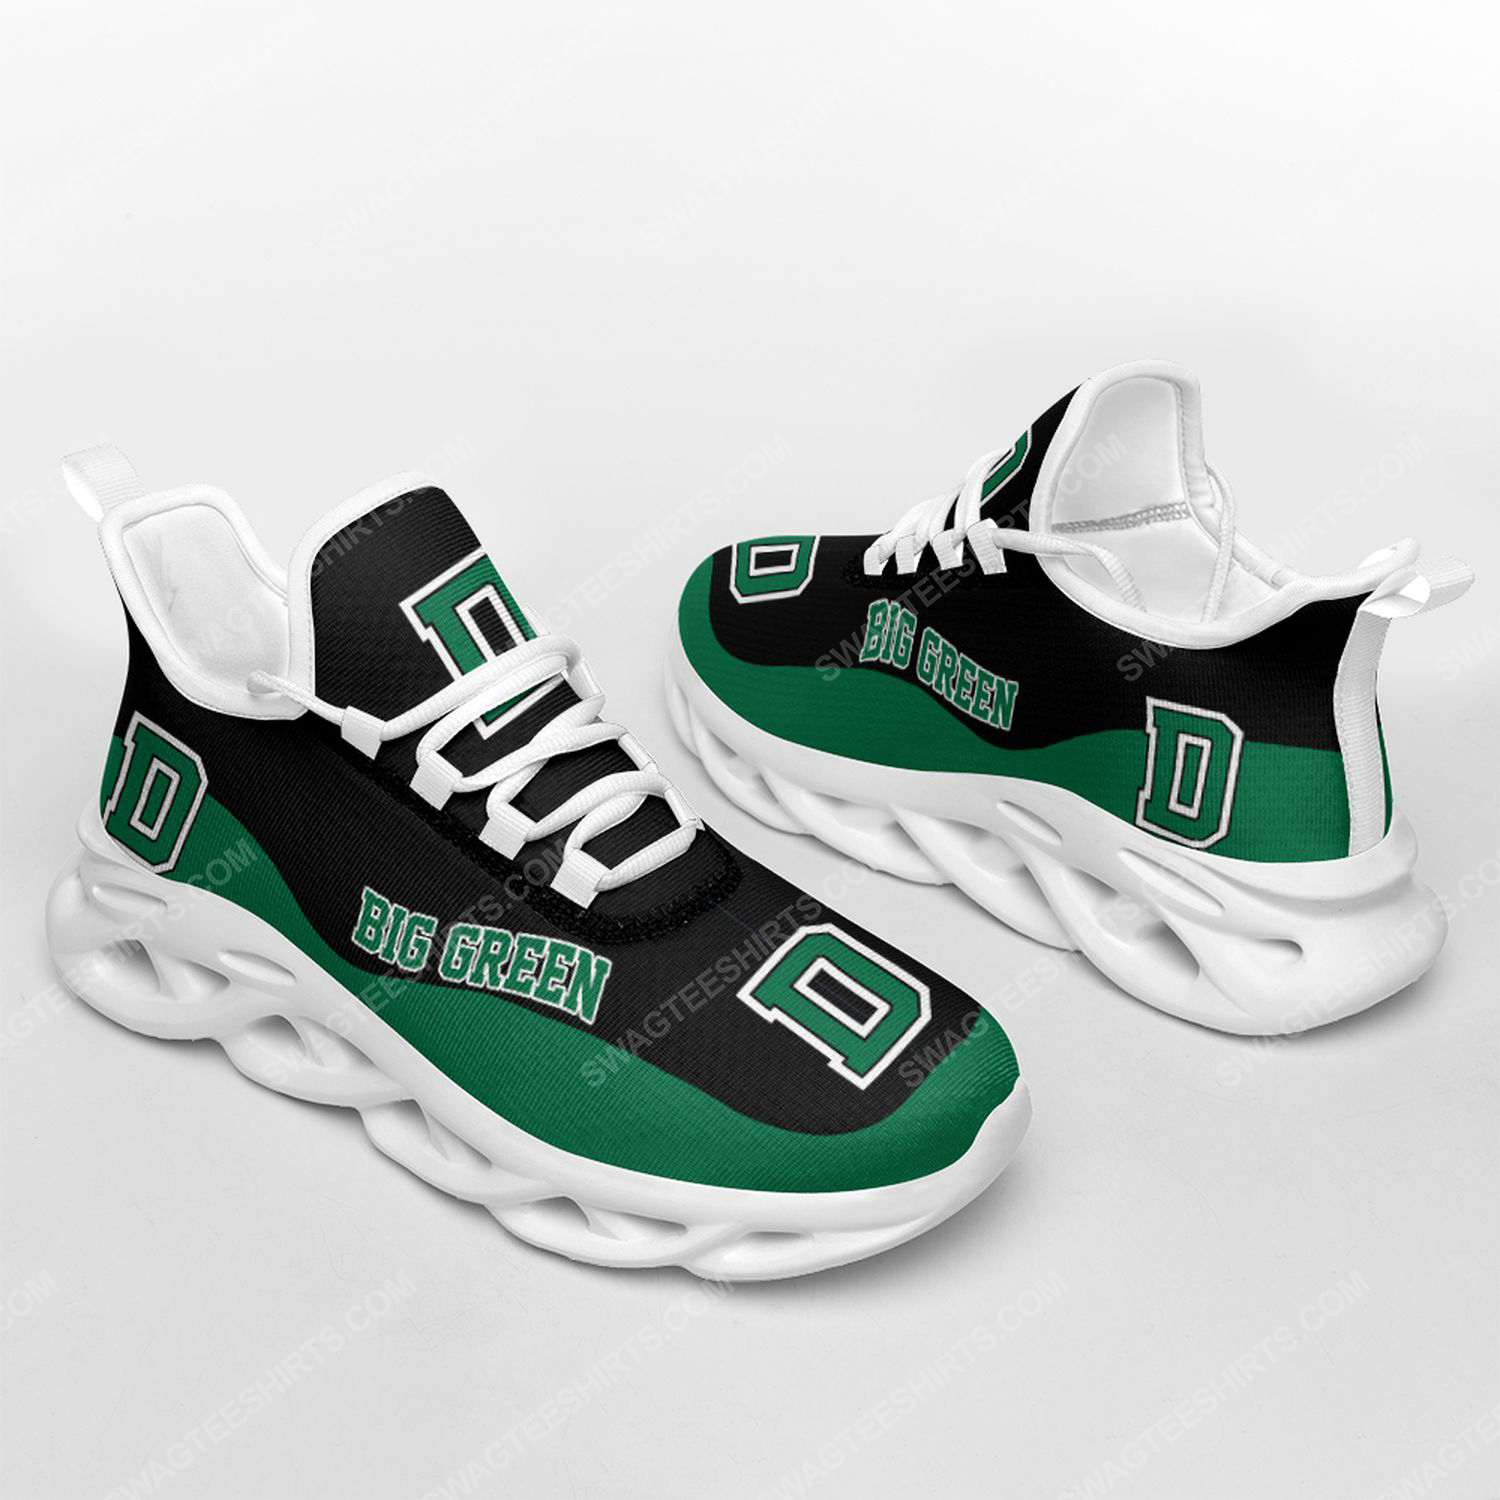 [special edition] The dartmouth big green football team max soul shoes – Maria